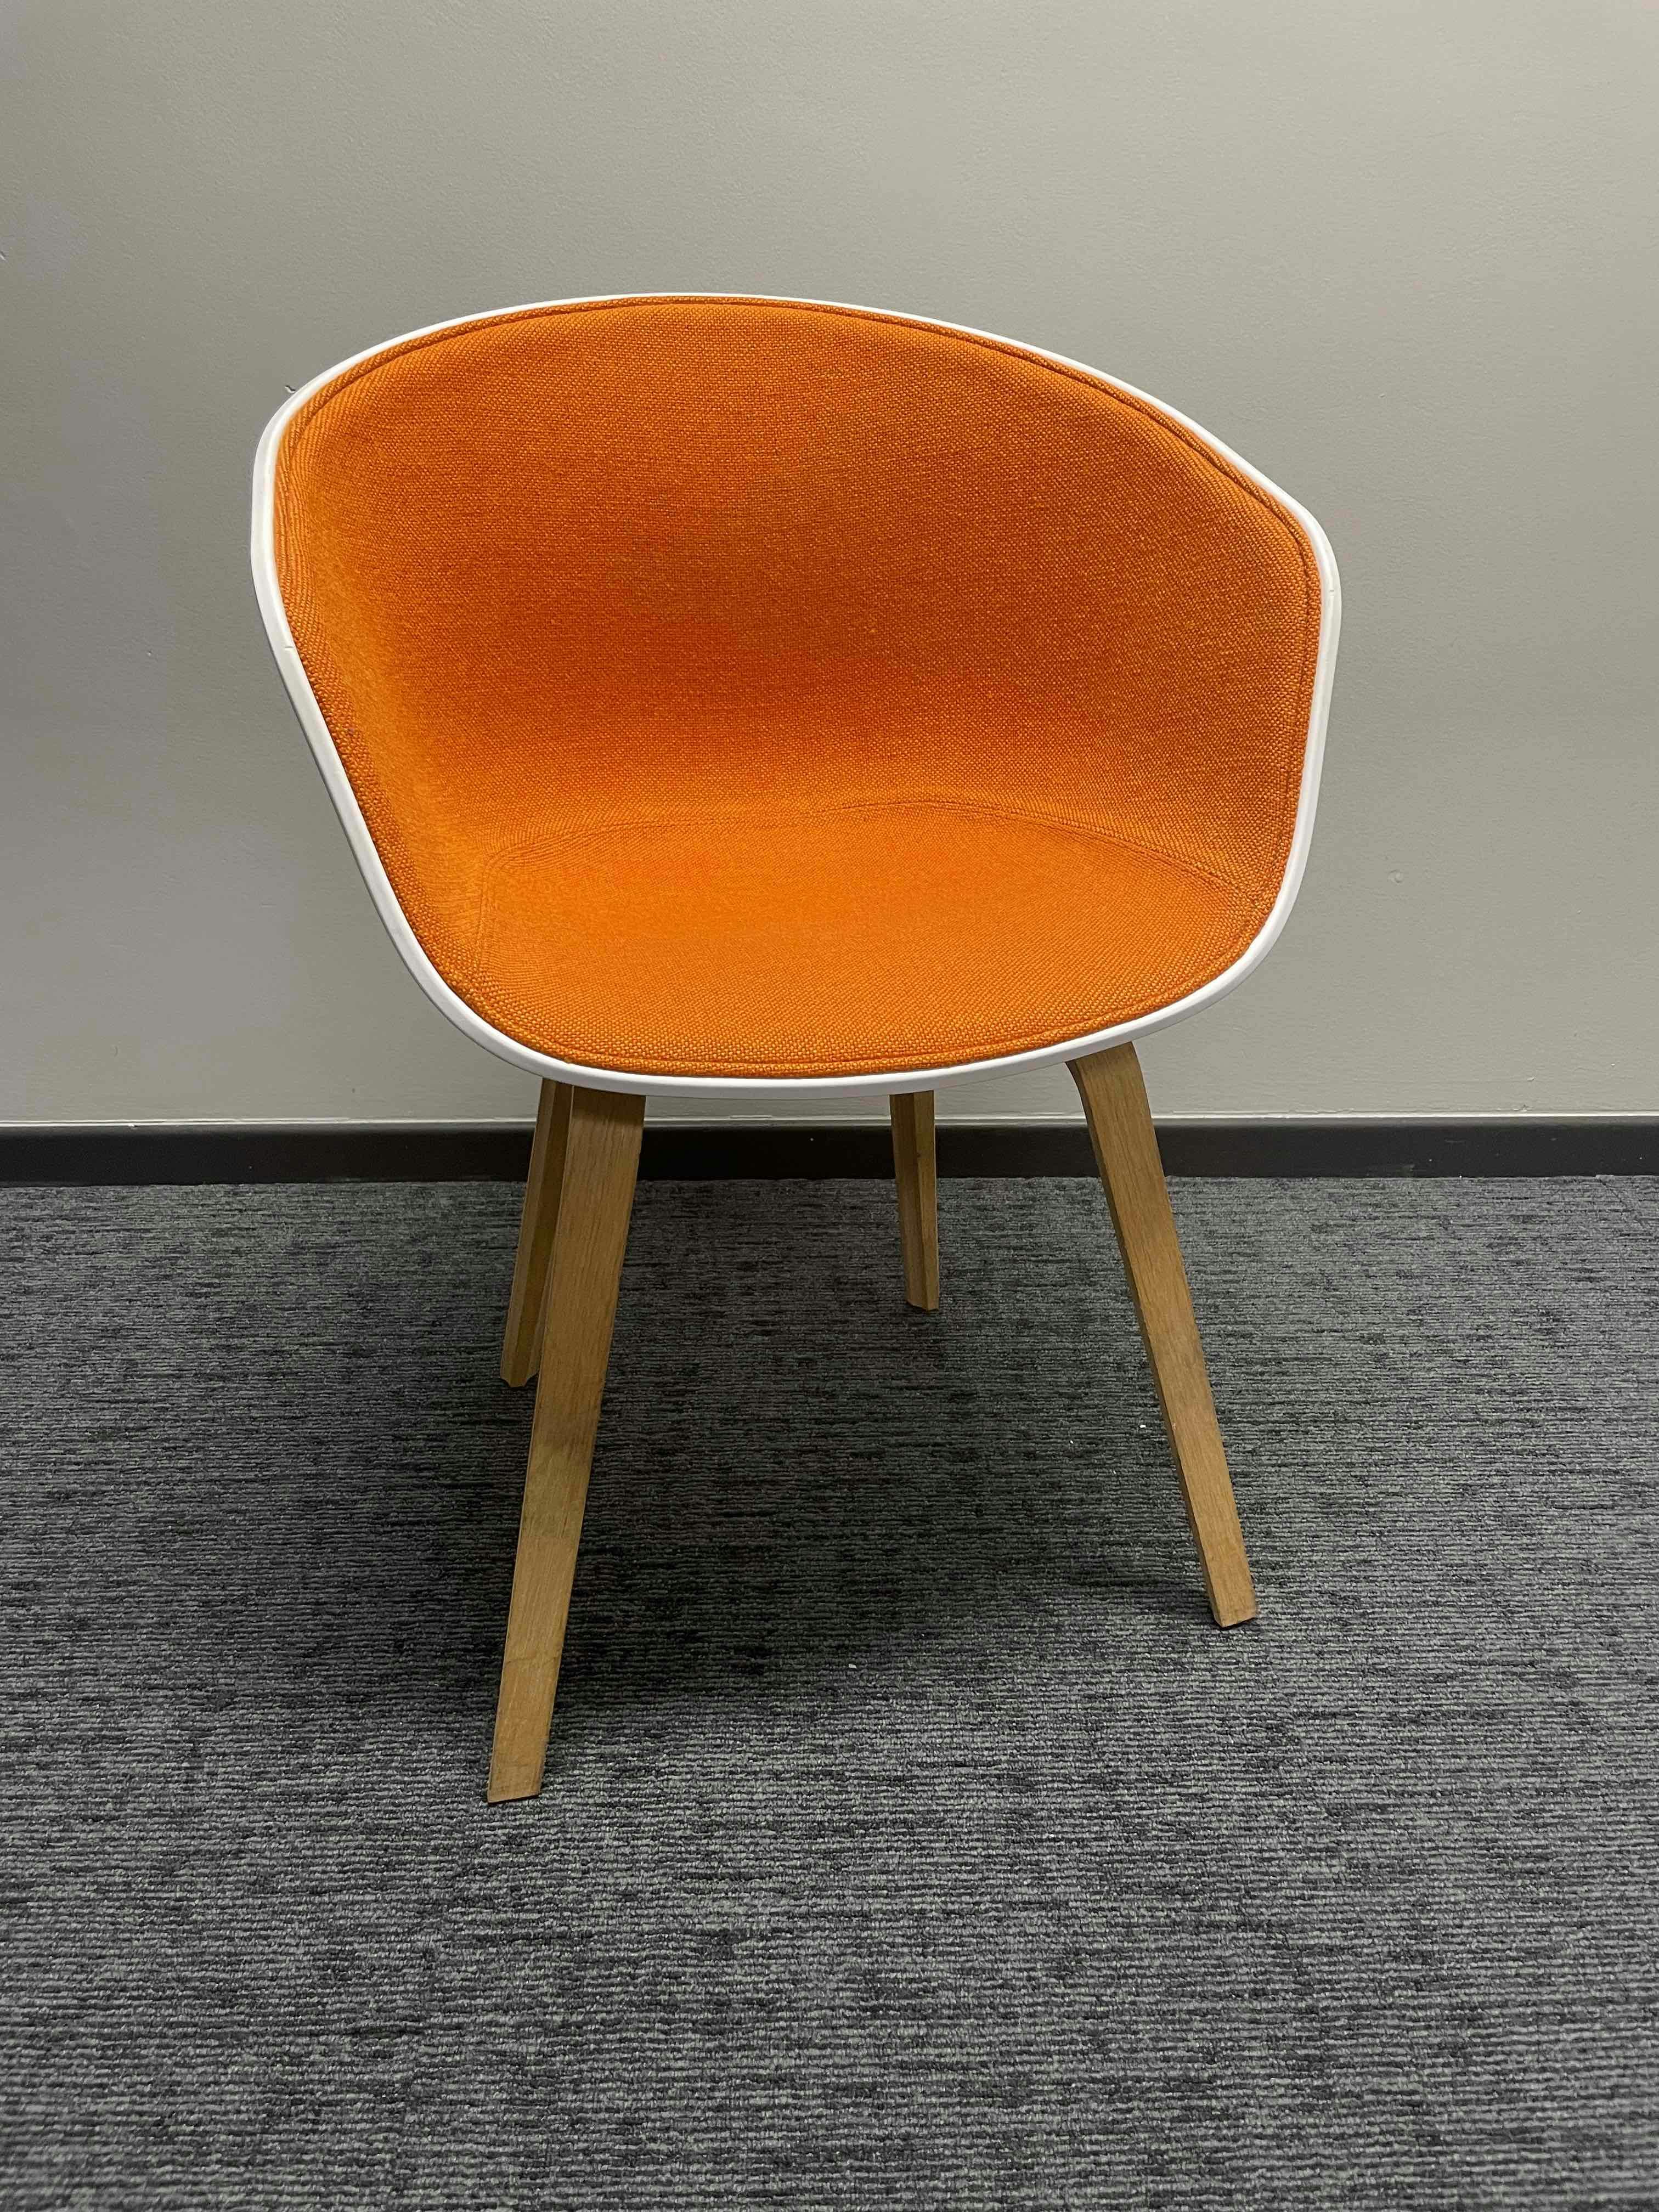 HAY Orange and white chairs - Second hand quality "Chairs" - Relieve Furniture